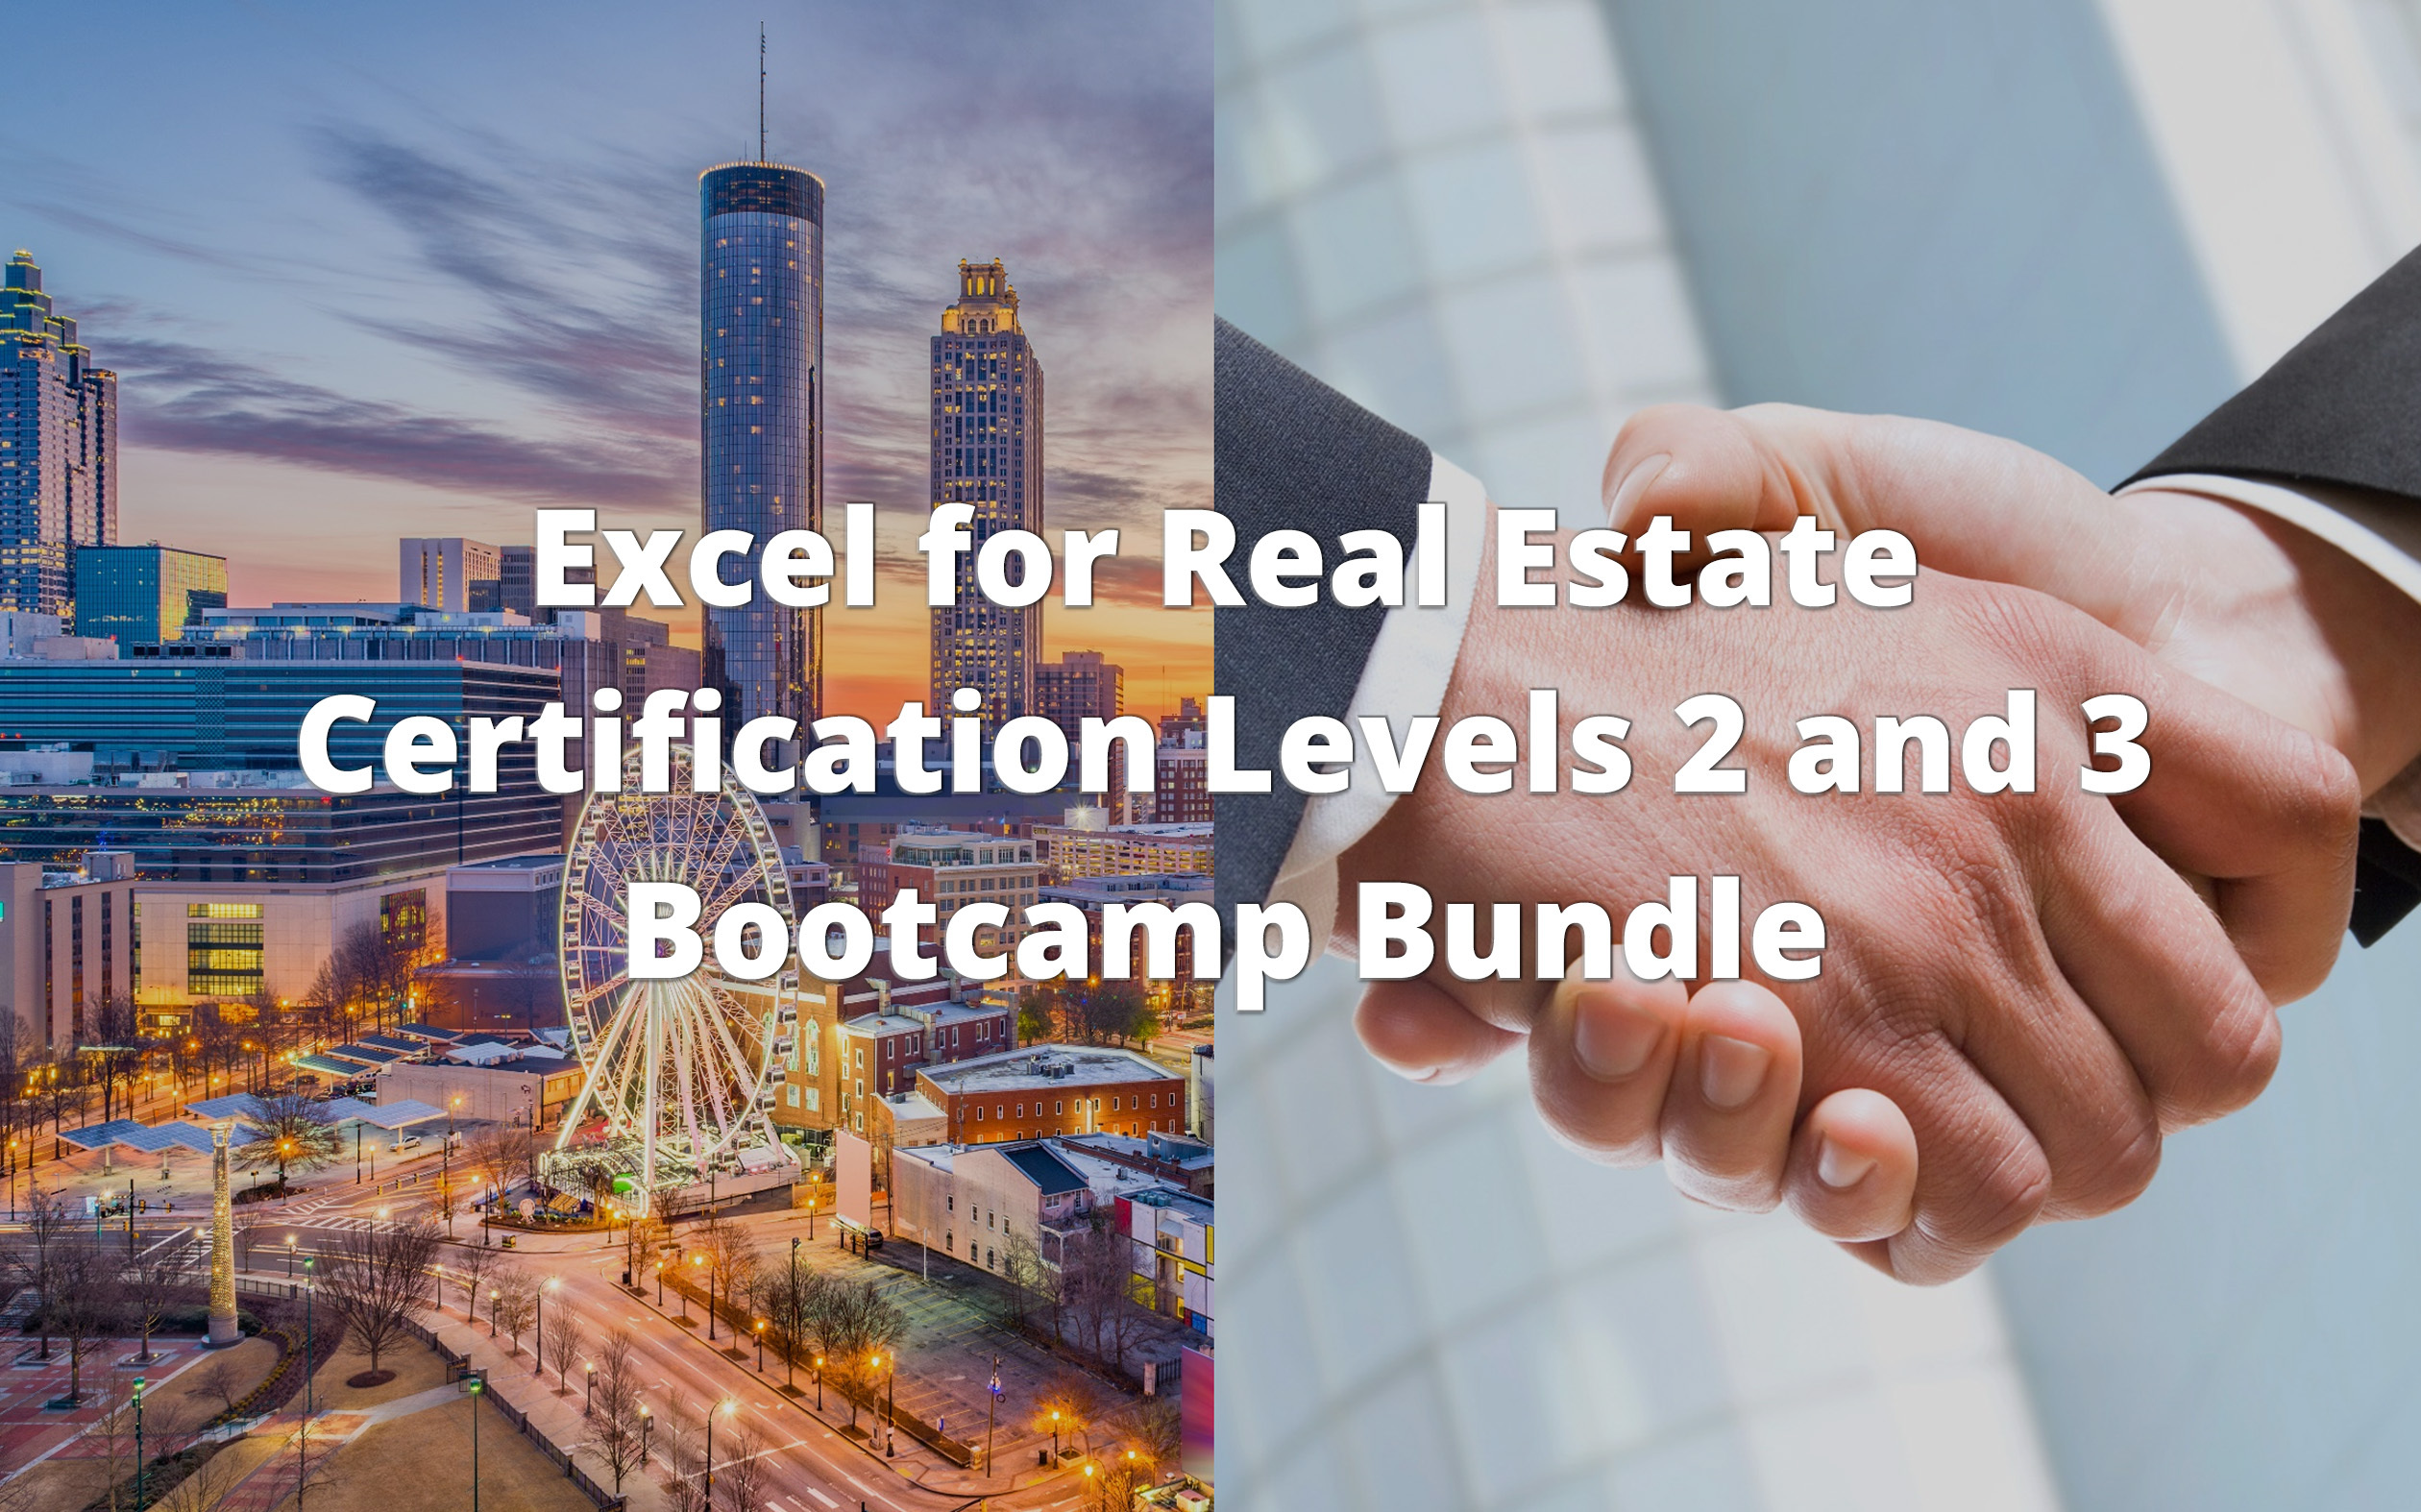 Excel for Real Estate Certification Levels 2 and 3 Bootcamp Bundle